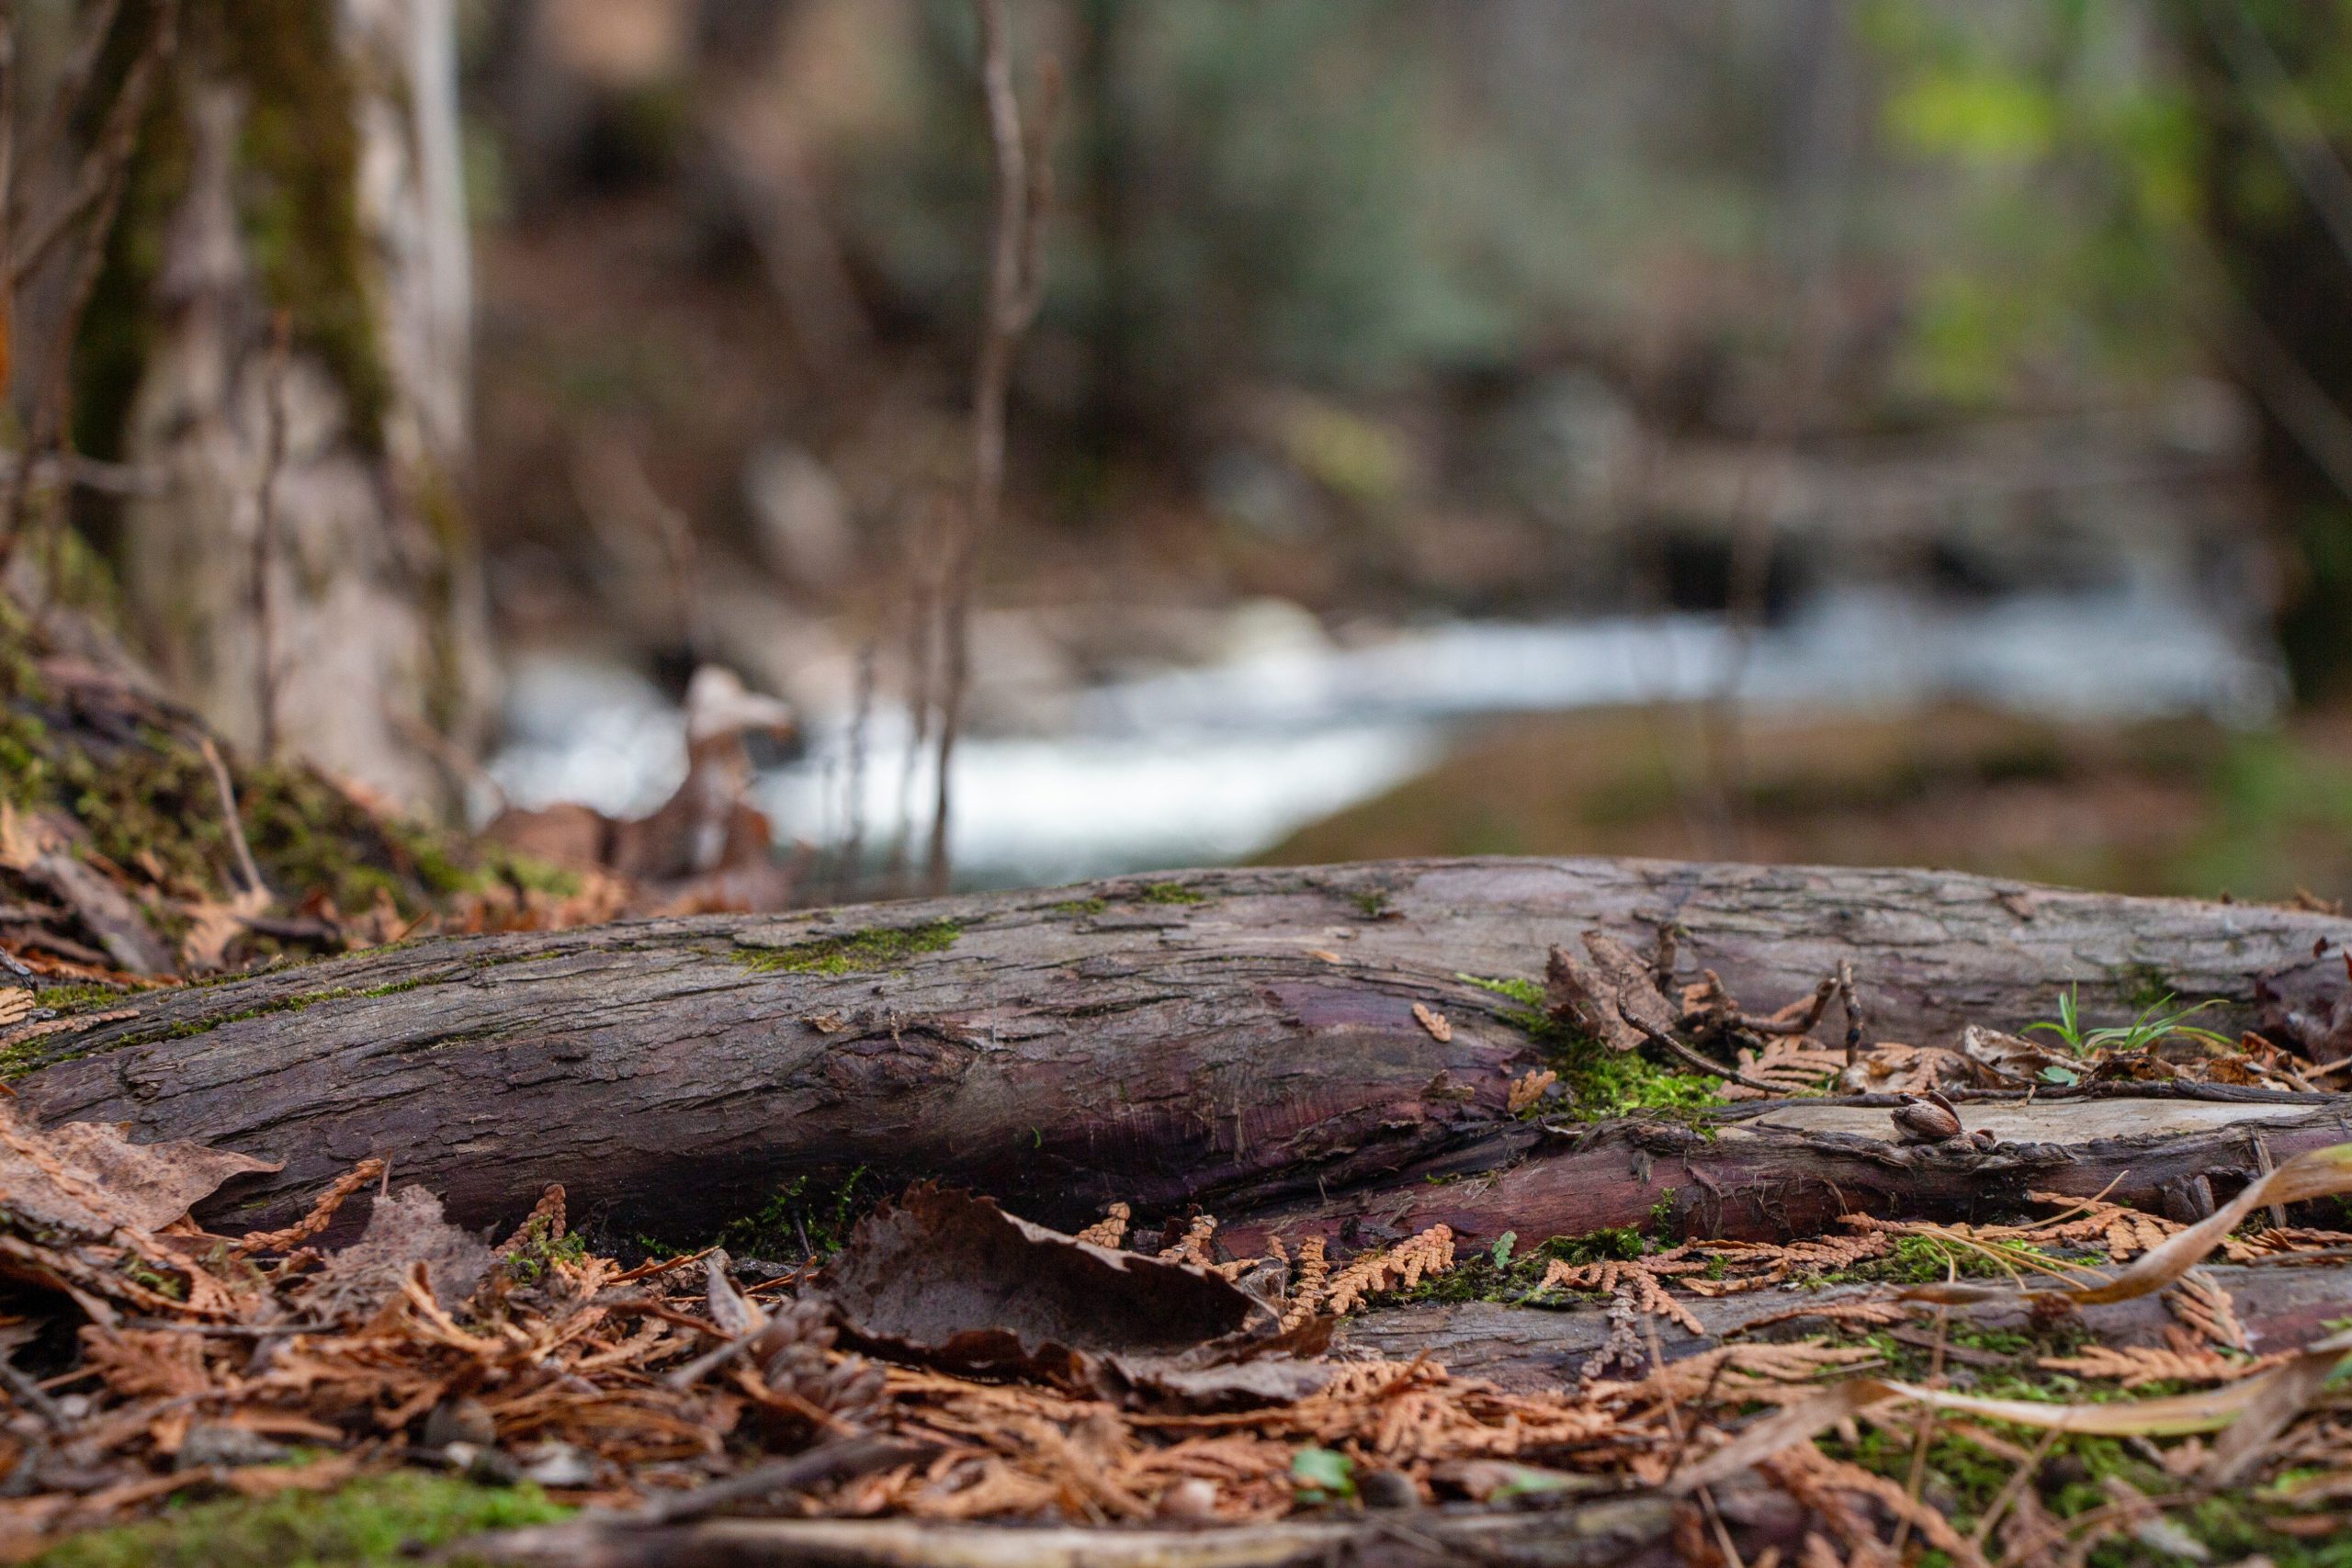 A weathered brown log on a path in the foreground with a small river in soft focus in the background